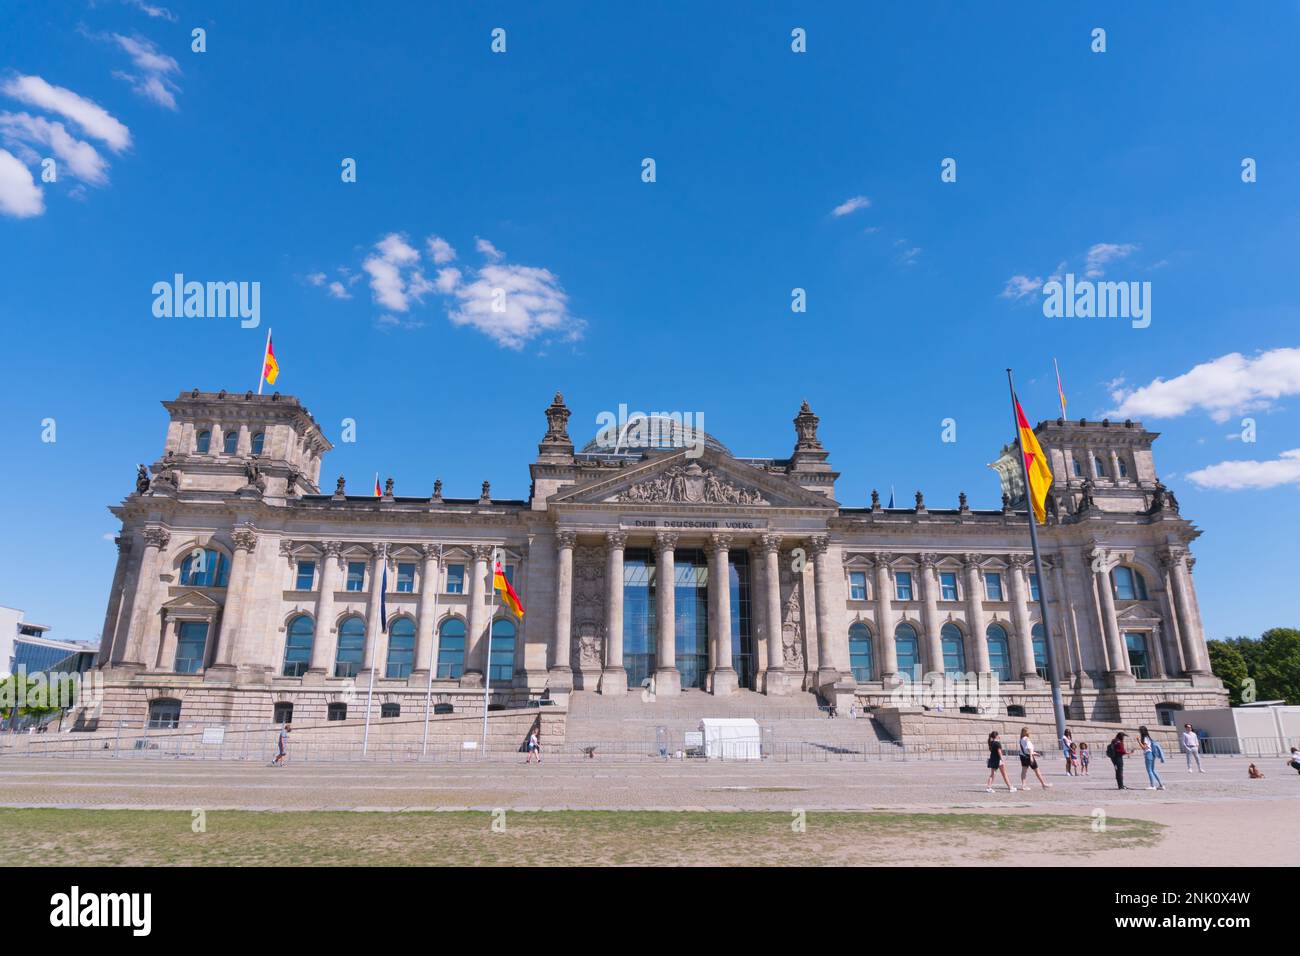 Berlin, Germany circa July, 2018: The Reichstag facade with German flags Stock Photo